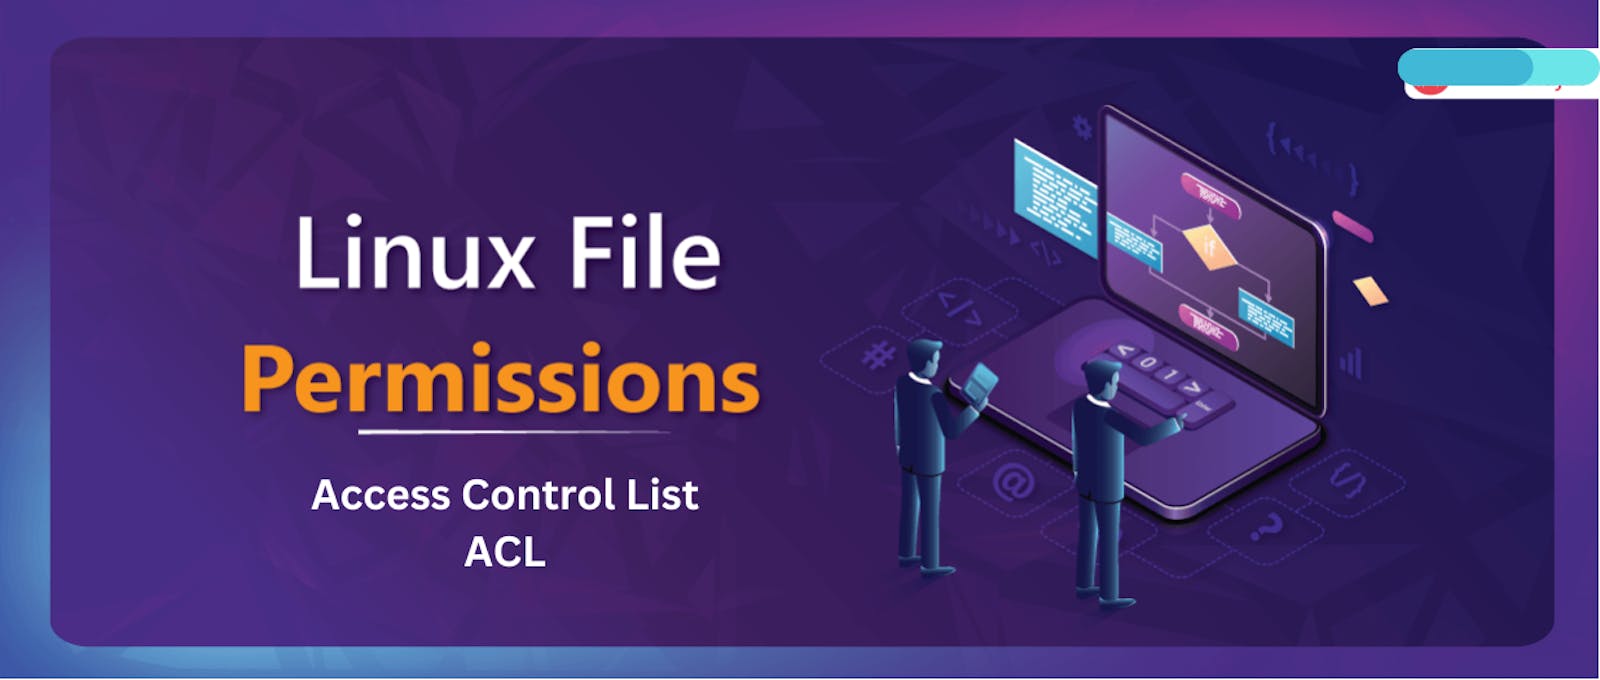 Linux File Permissions and ACL